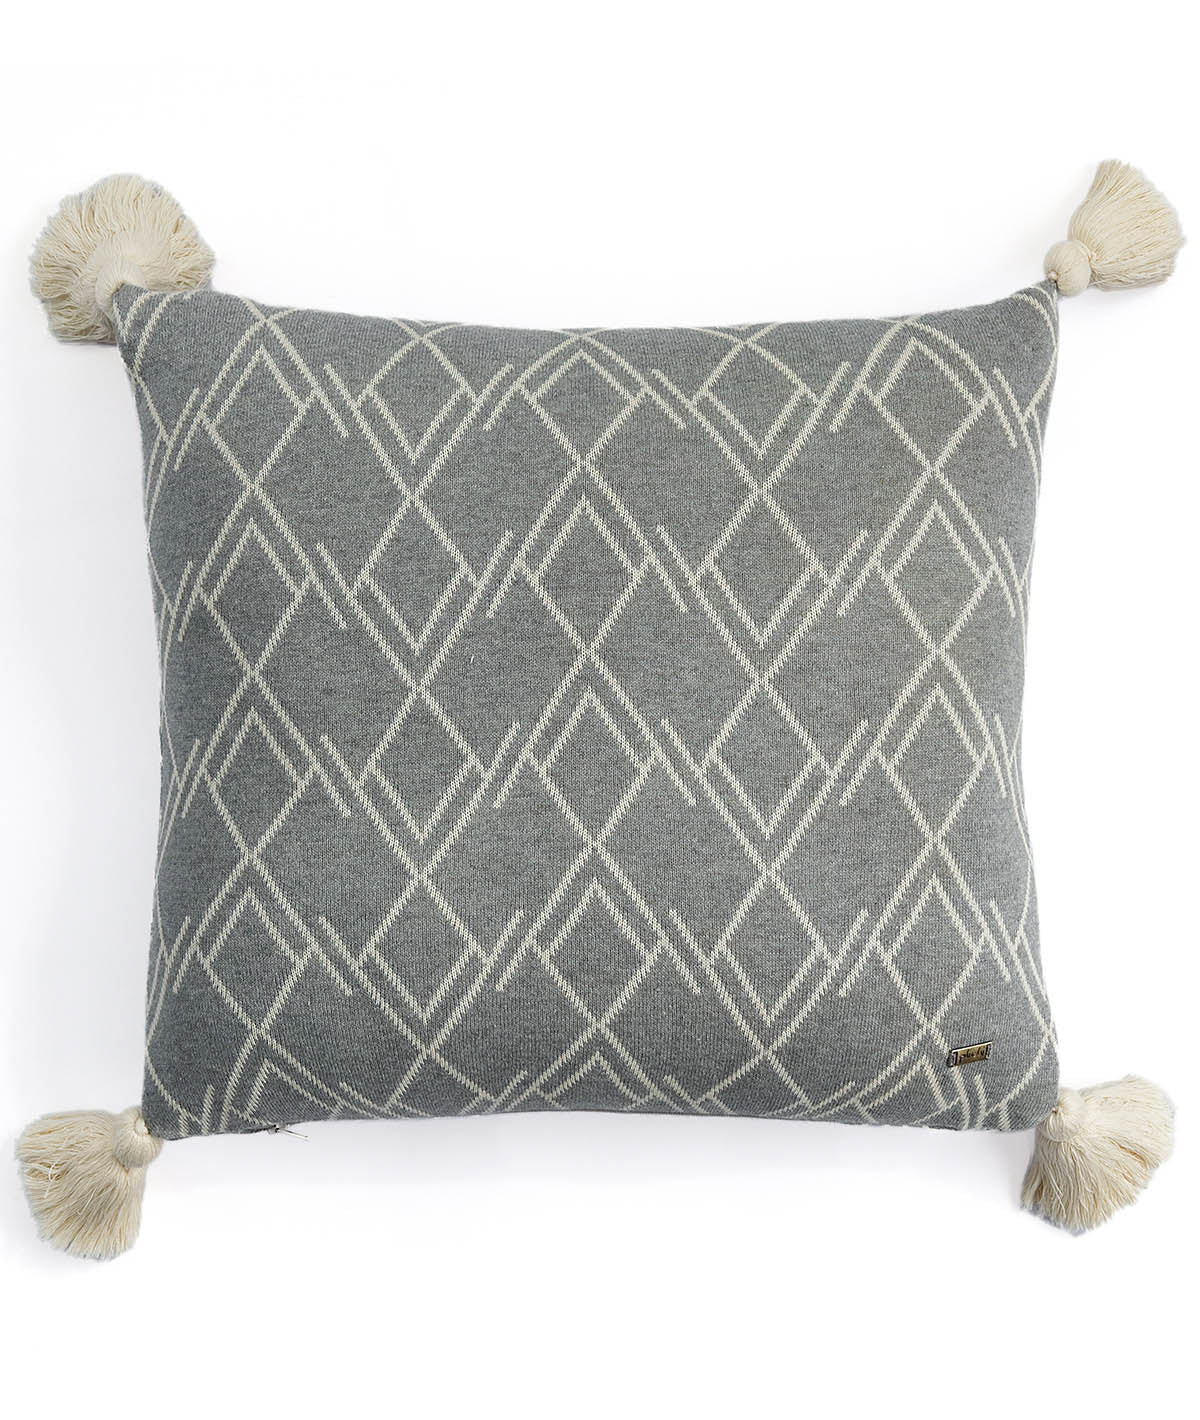 Gianna Cotton Knitted Decorative Light Grey Melange & Natural Color 18 x 18 Inches Cushion Cover